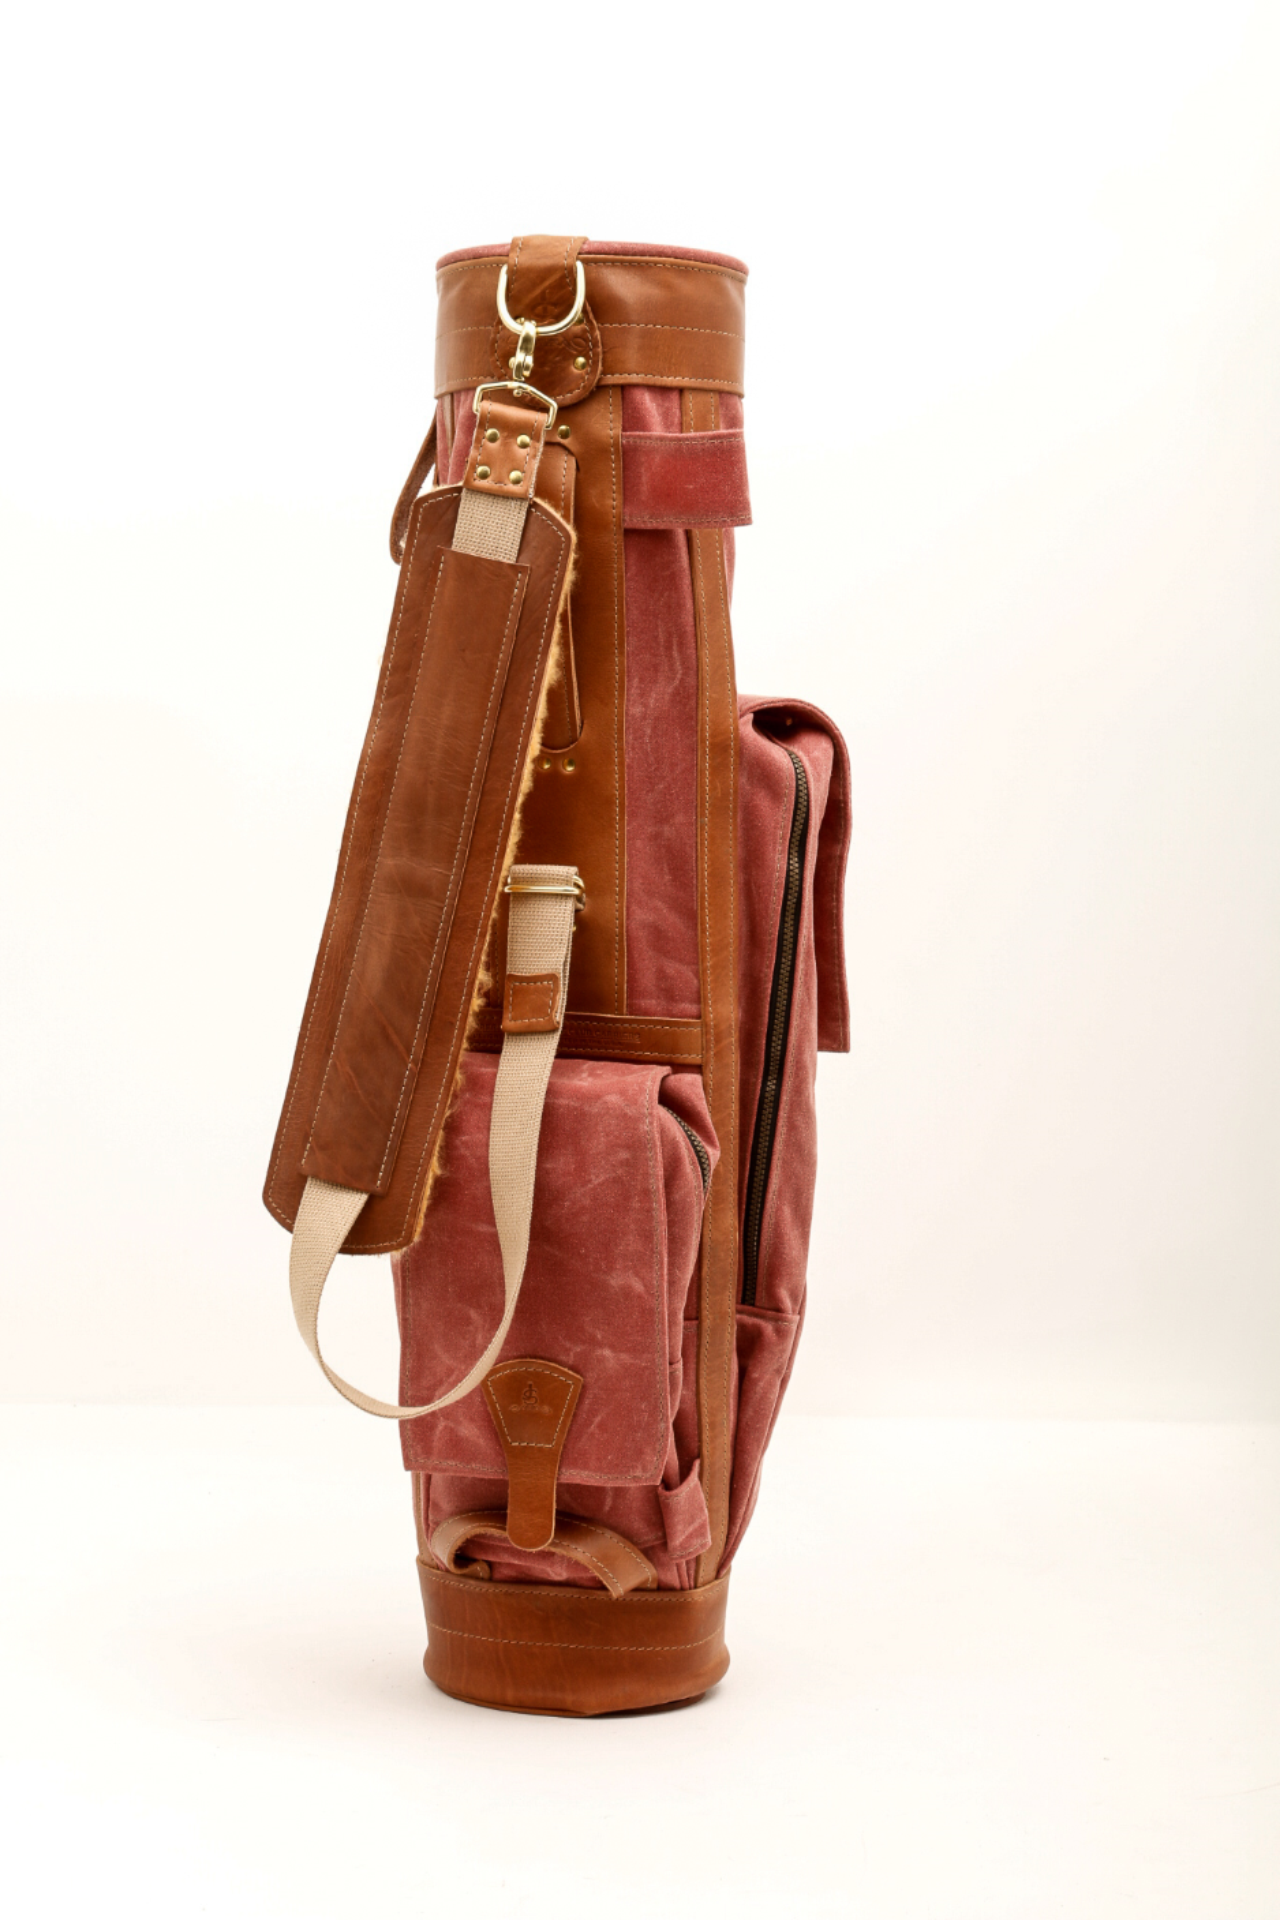 50+ Vintage Golf Bag Stock Photos, Pictures & Royalty-Free Images - iStock  | Old golf bag, Antique golf